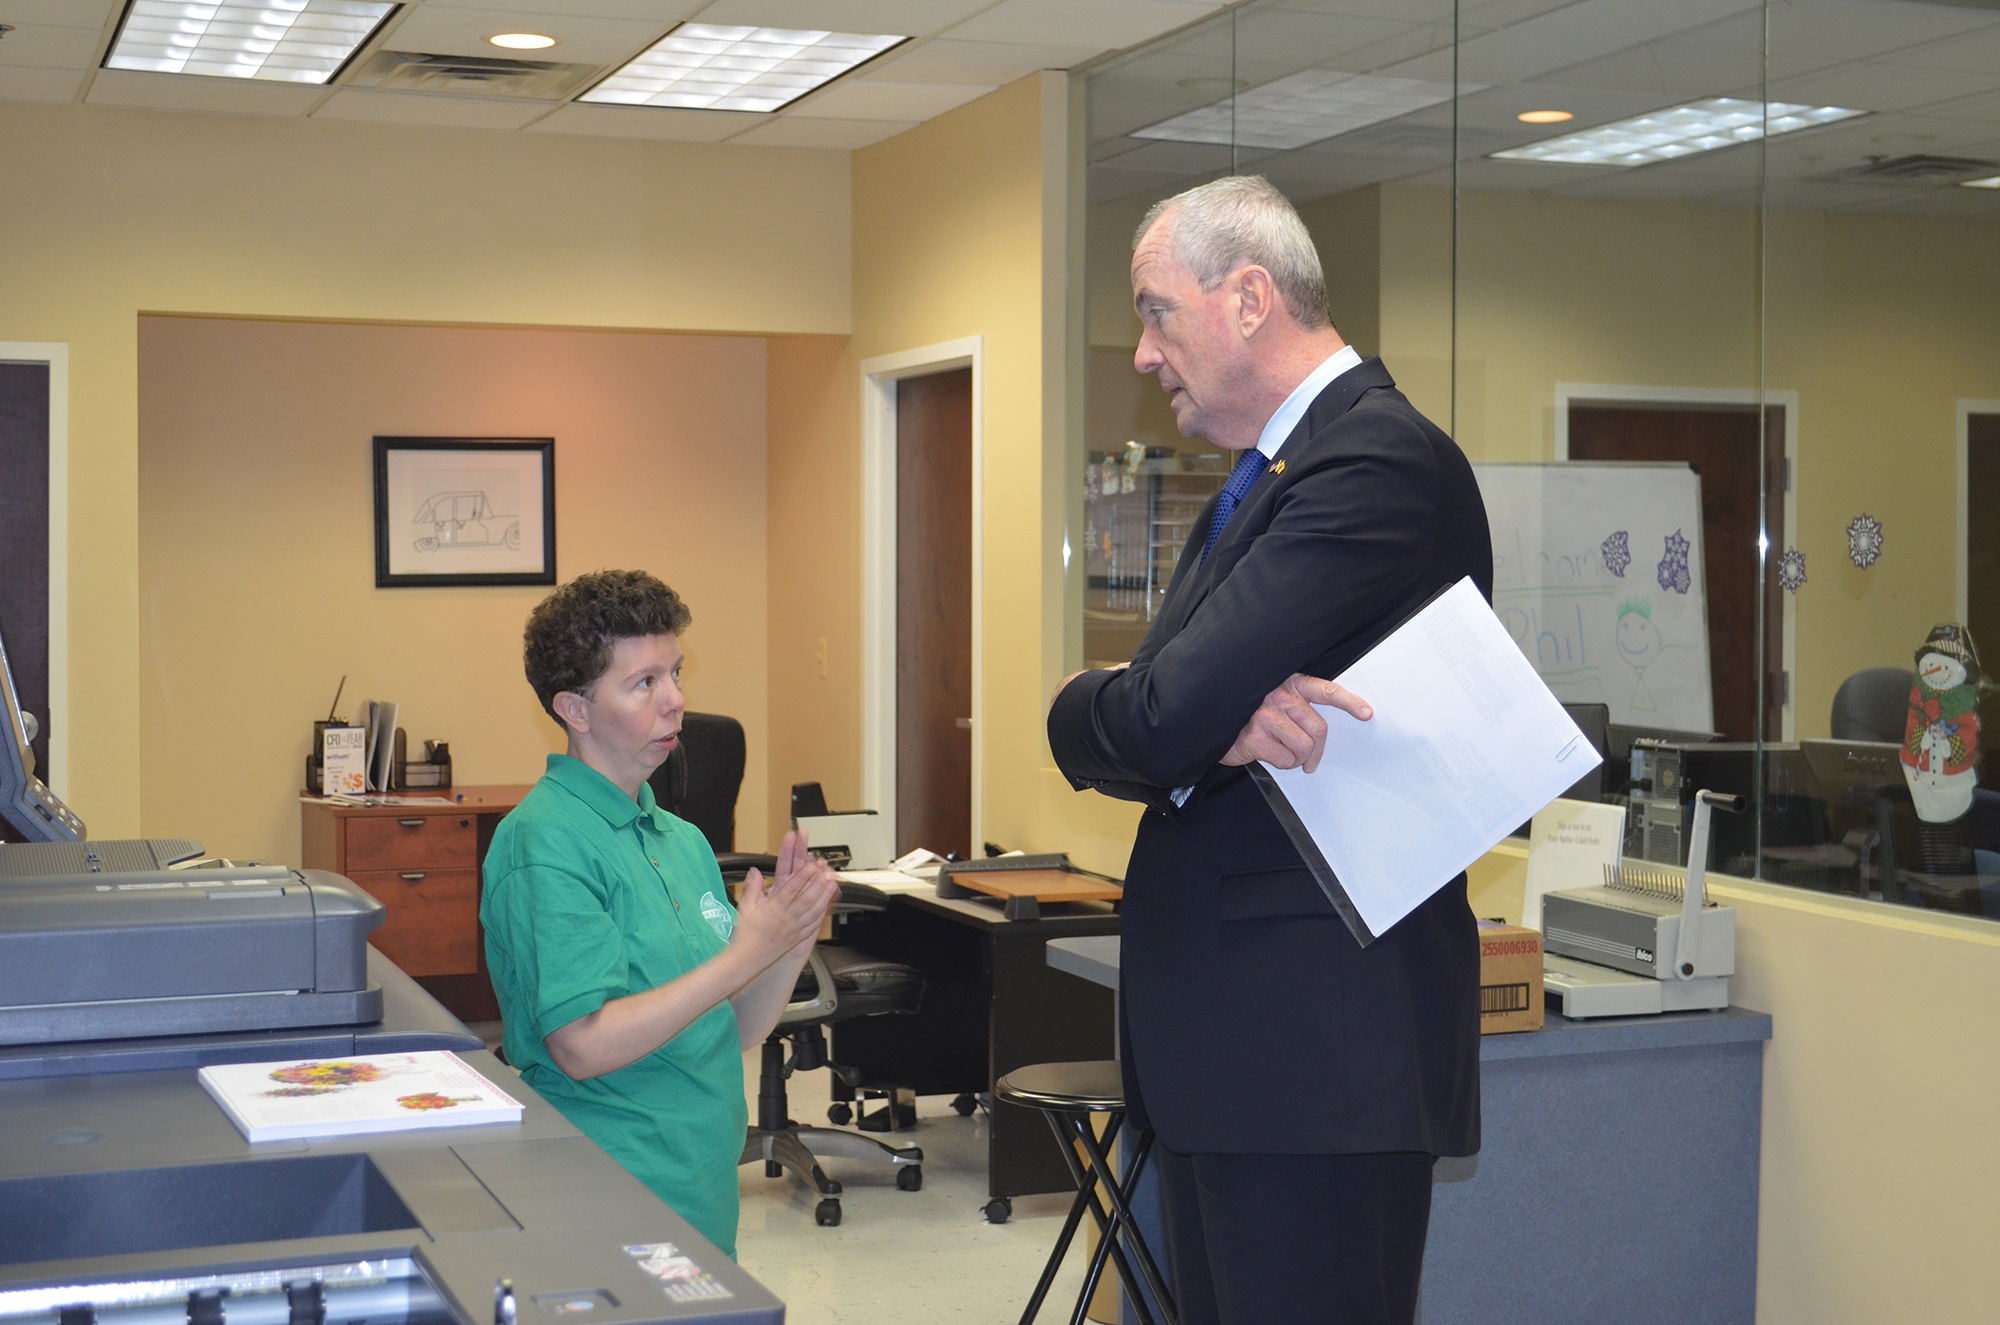 New Jersey gubernatorial candidate Phil Murphy visited nonprofit Community Options’ Daily Plan It office in Princeton, NJ.